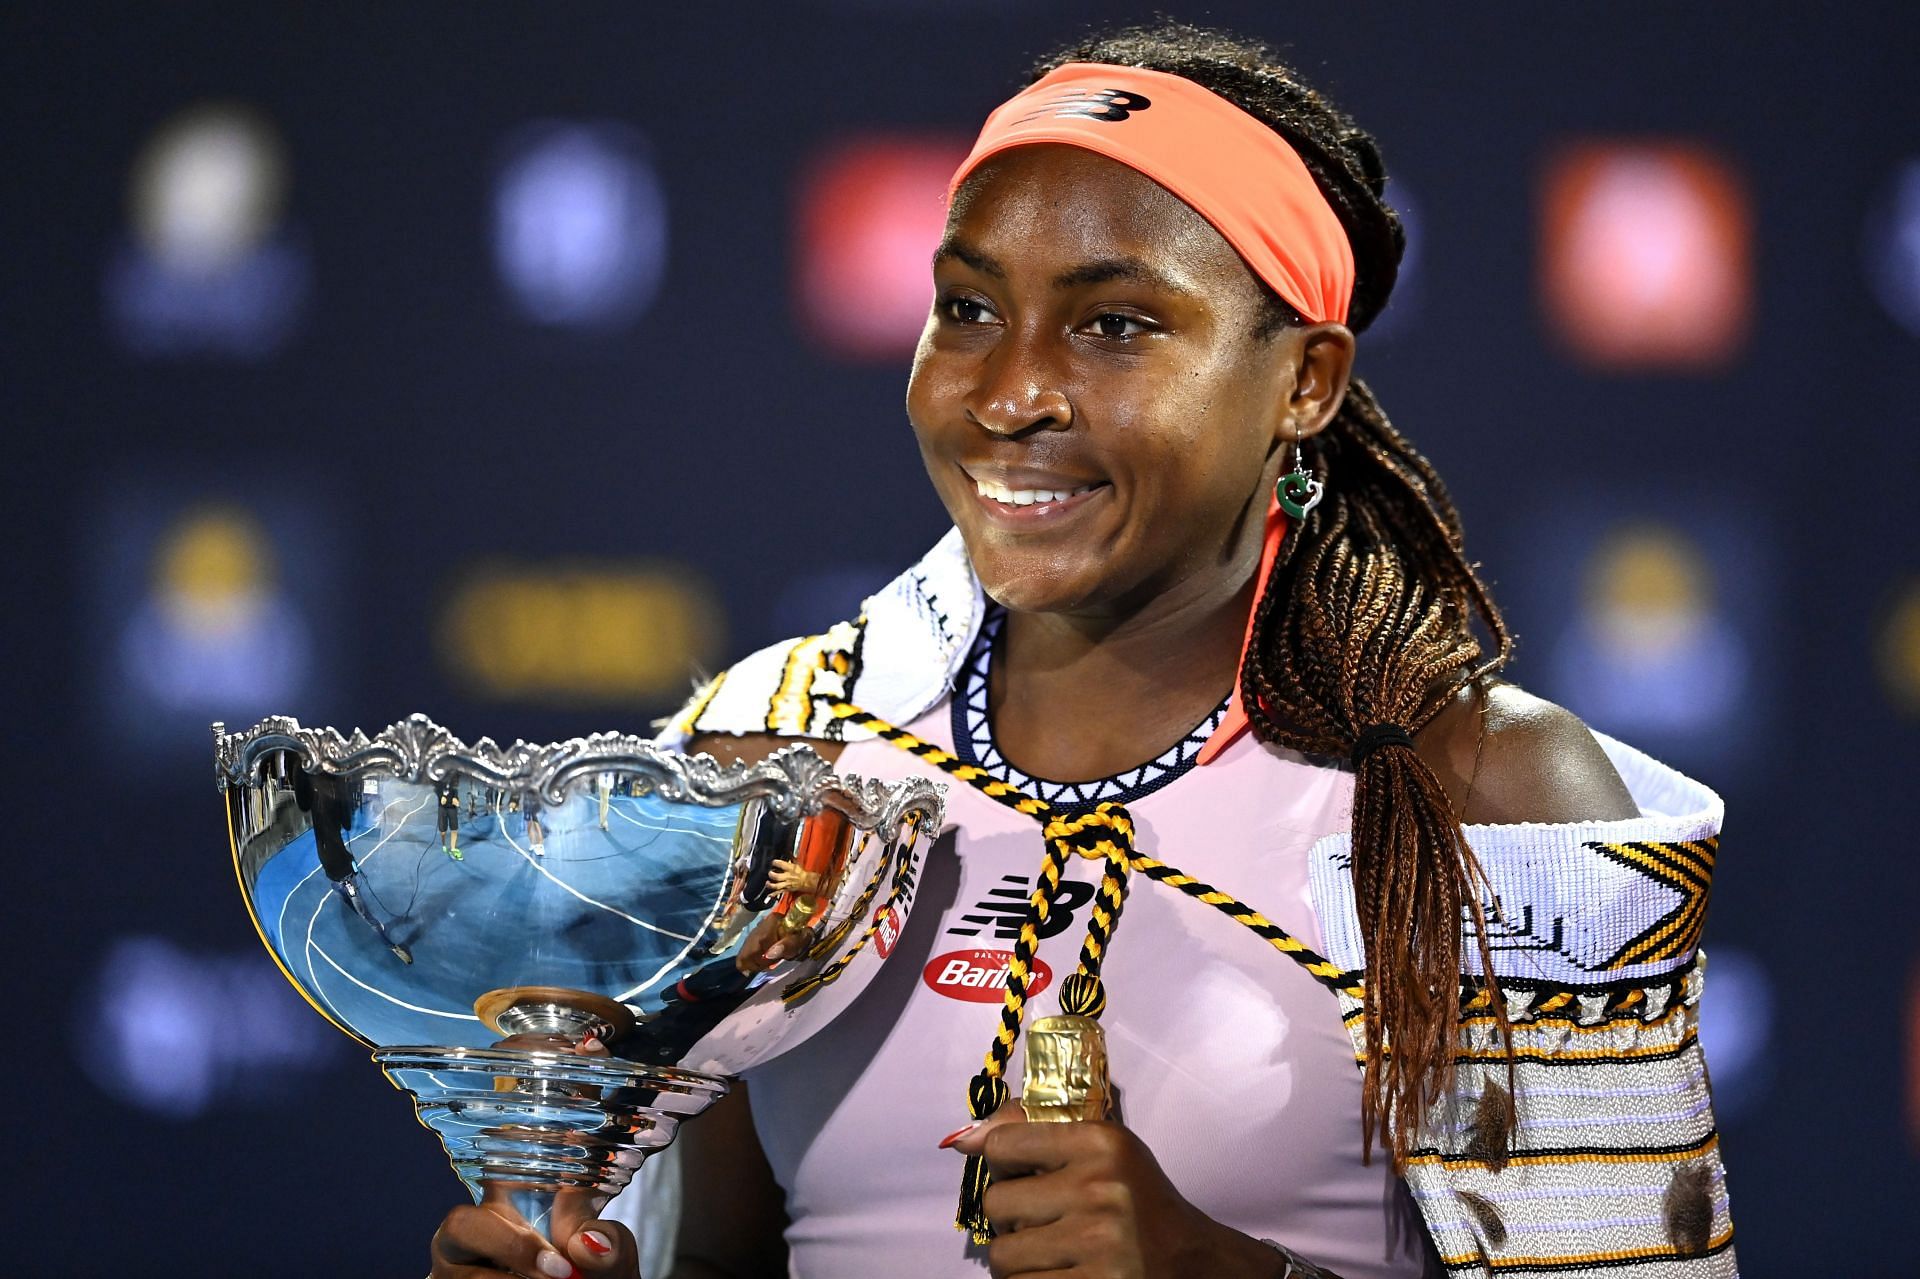 Gauff pictured at the 2023 ASB Classic